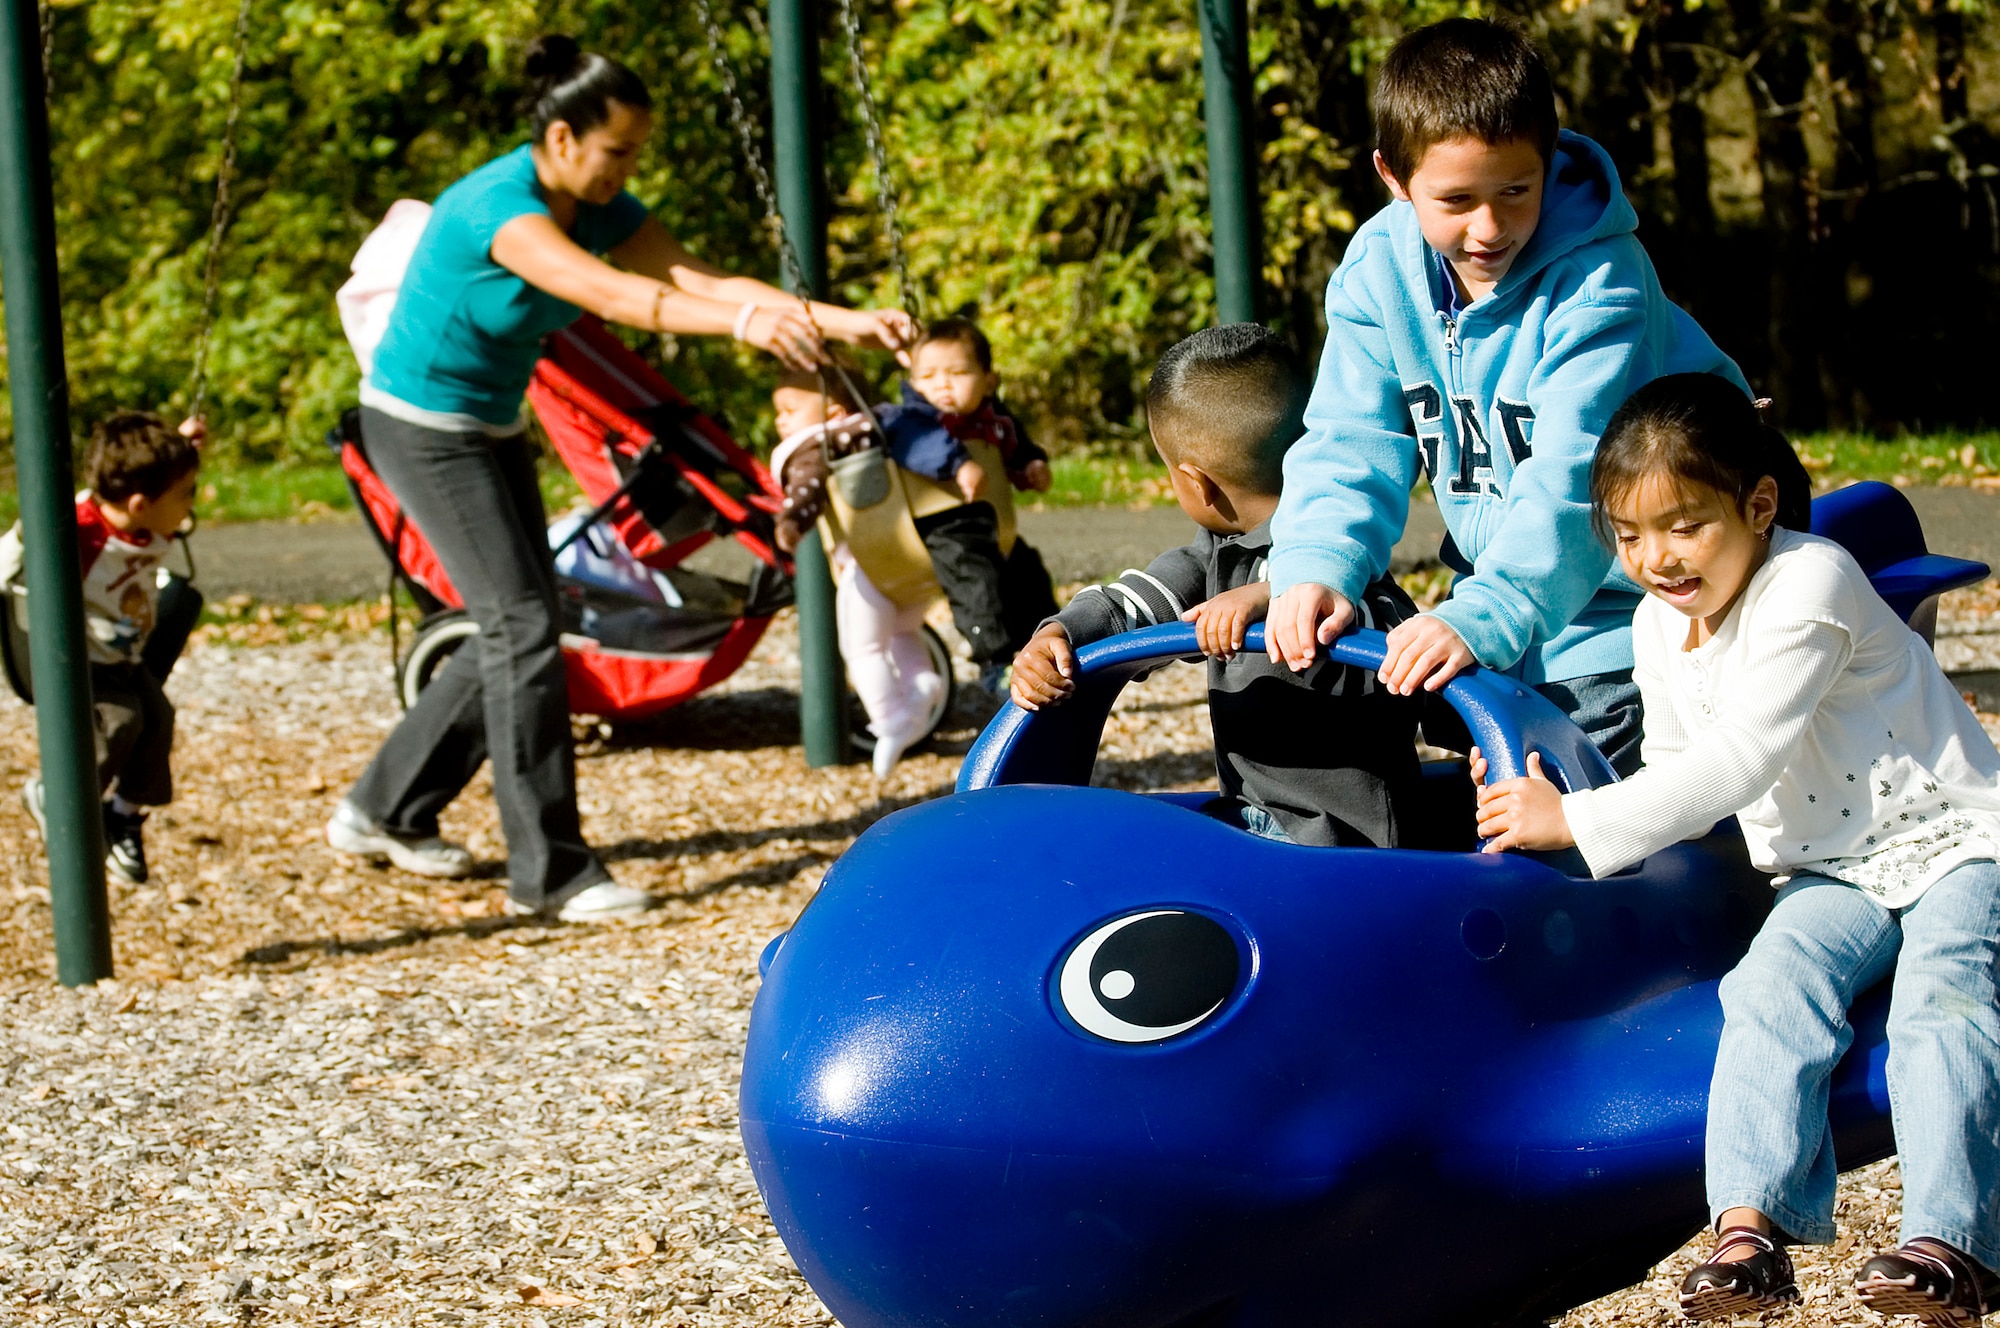 From right, Iris Noguez, Adrian Rodriguez and Mauricio Noguez have fun on playground equipment at a McChord park while Catalina Noguez swings the younger children. (U.S. Air Force photo/Abner Guzman)